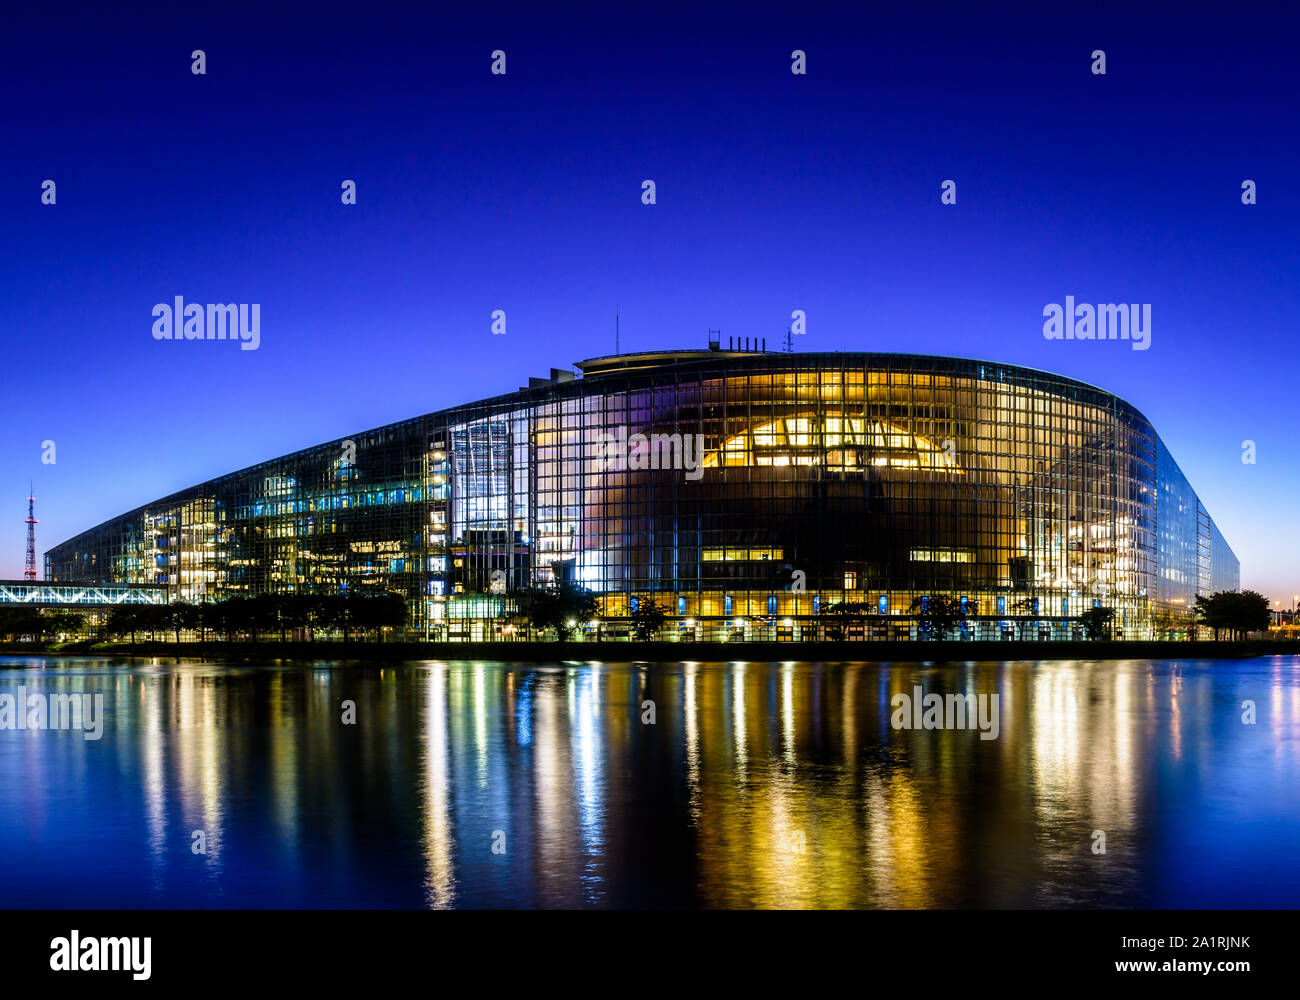 Nightfall view at blue hour of the glass facade of the Louise Weiss building, seat of the European Parliament in Strasbourg, France. Stock Photo